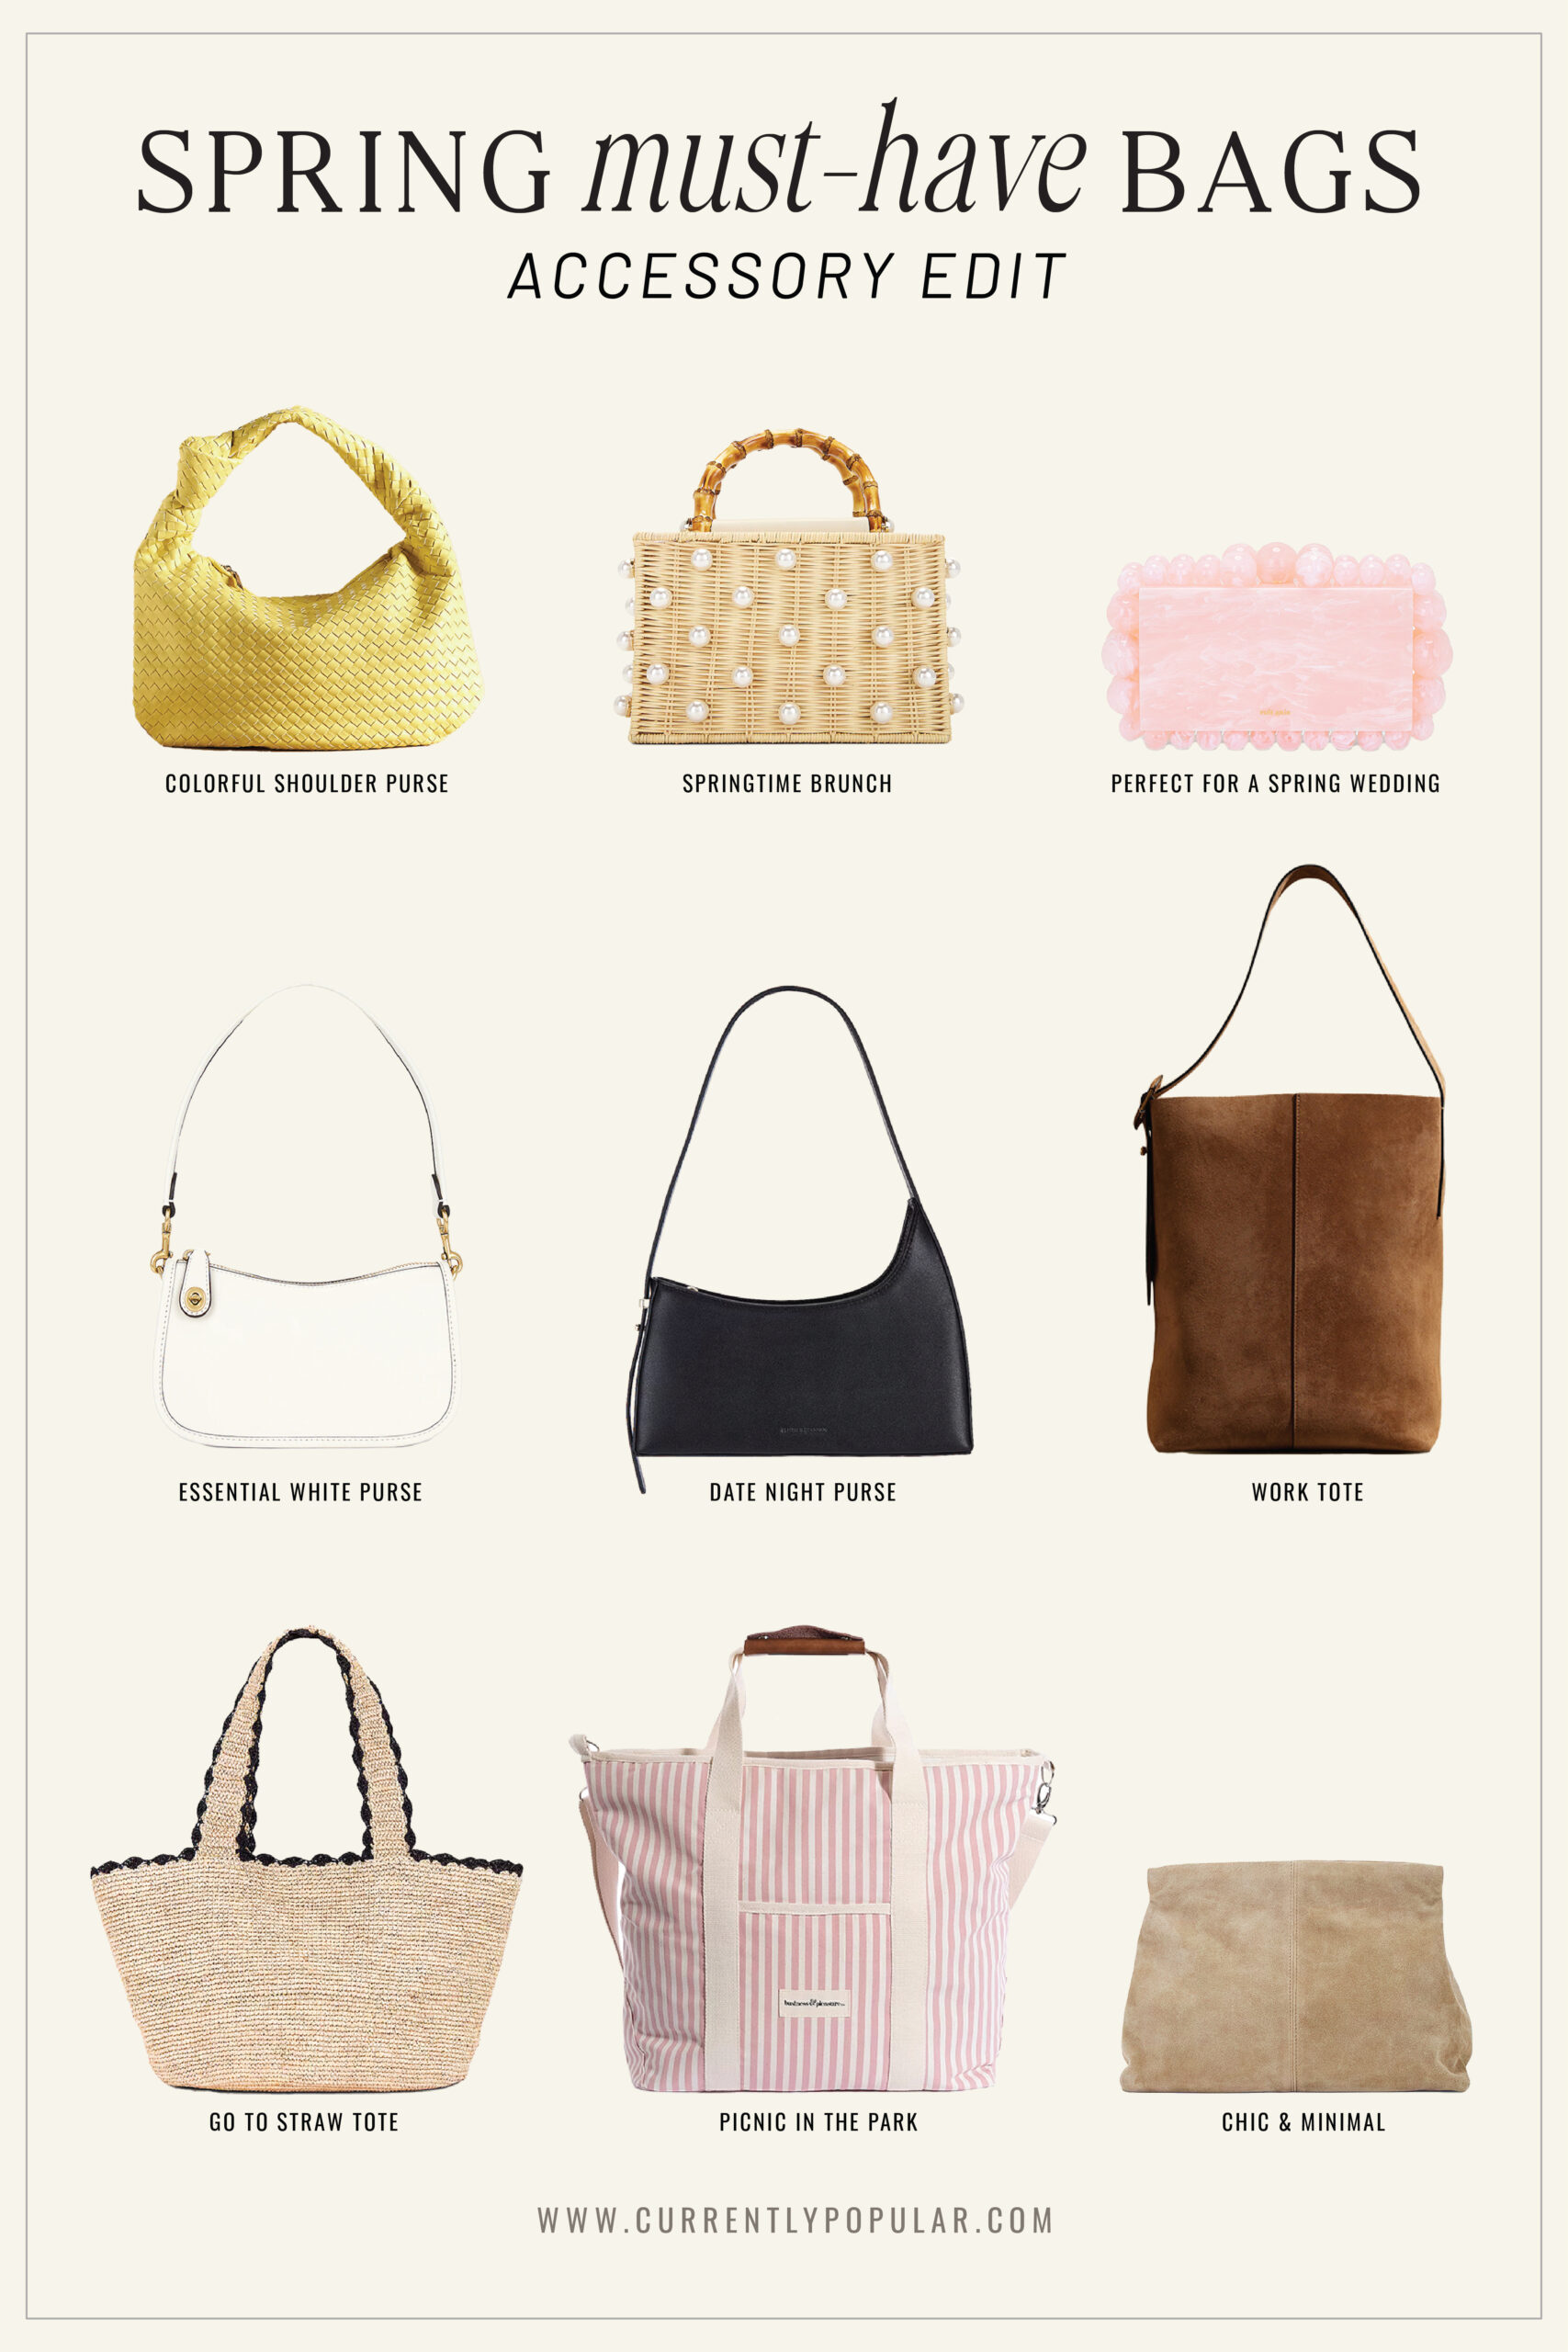 Spring must-have bags: a colorful shoulder purse, a pearl-studded bag for brunch, a pink clutch for weddings, a white and black purse for essential and date night, a straw tote, and a minimalist chic pouch.